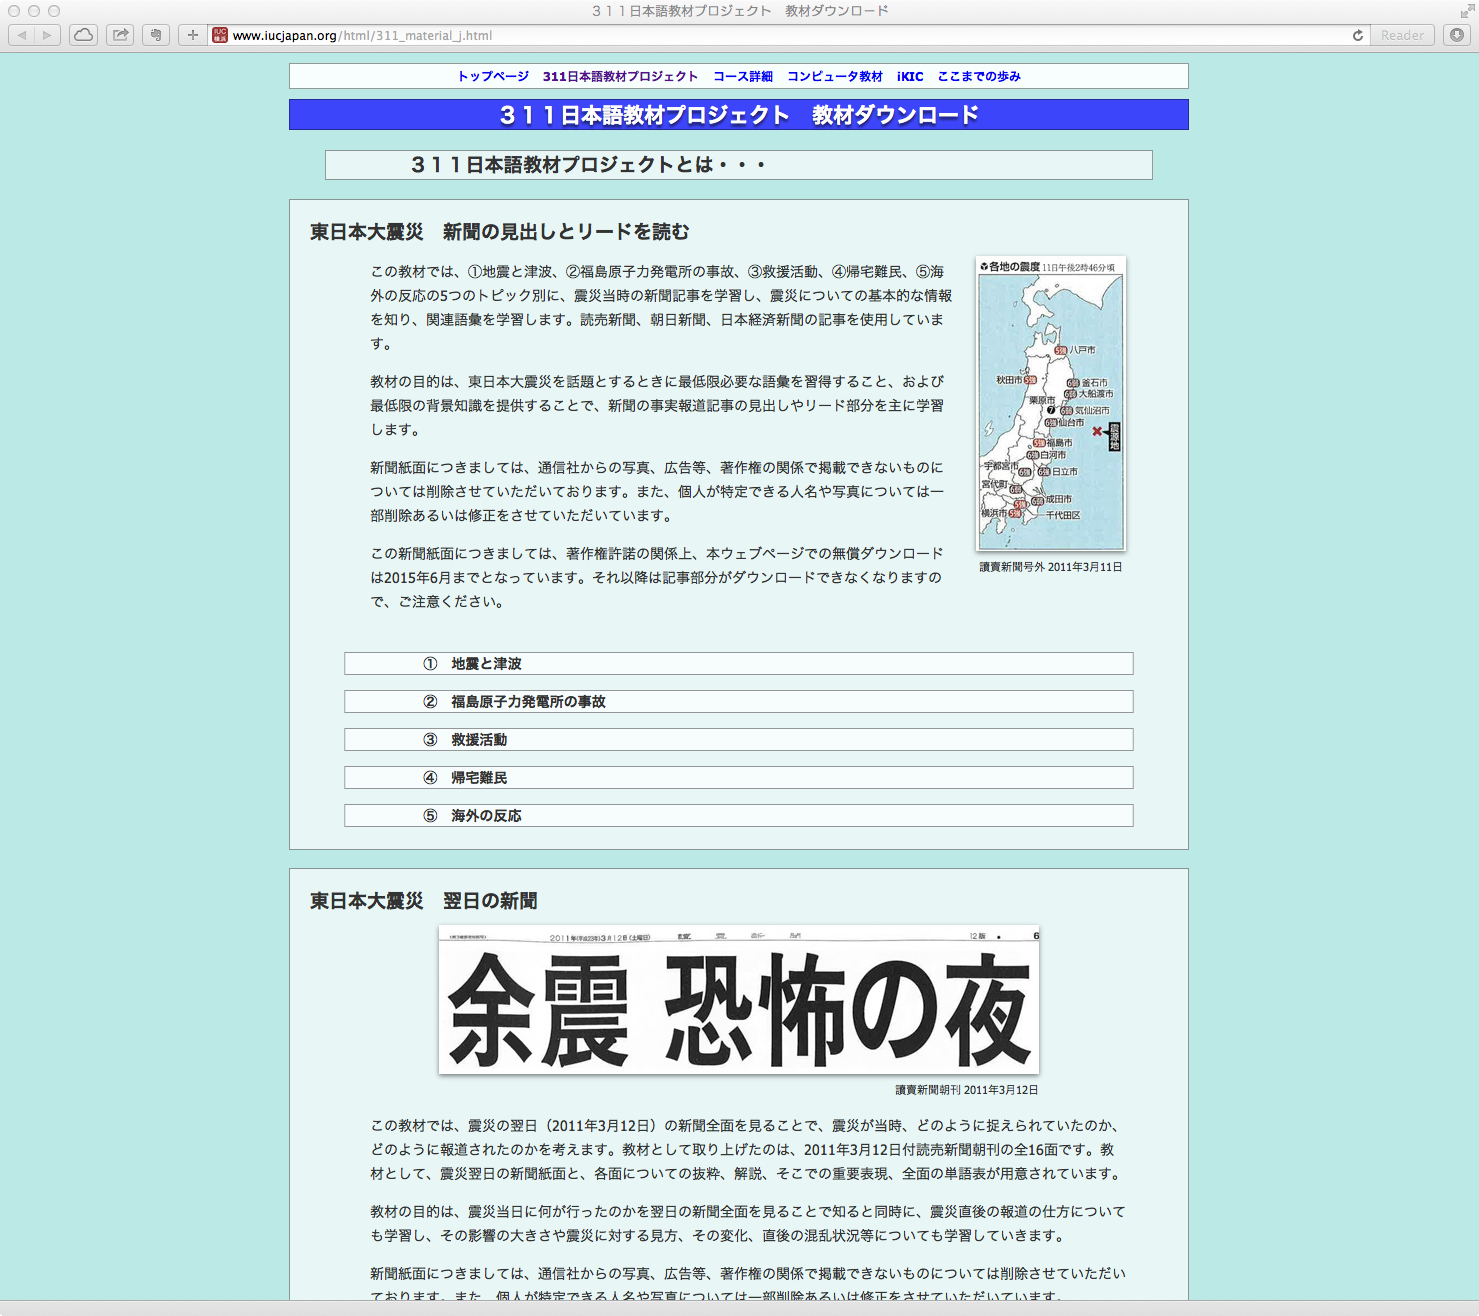 WEBSITE: The 3.11 Japanese Teaching Materials Project (Inter-University Center for Japanese Language Studies)